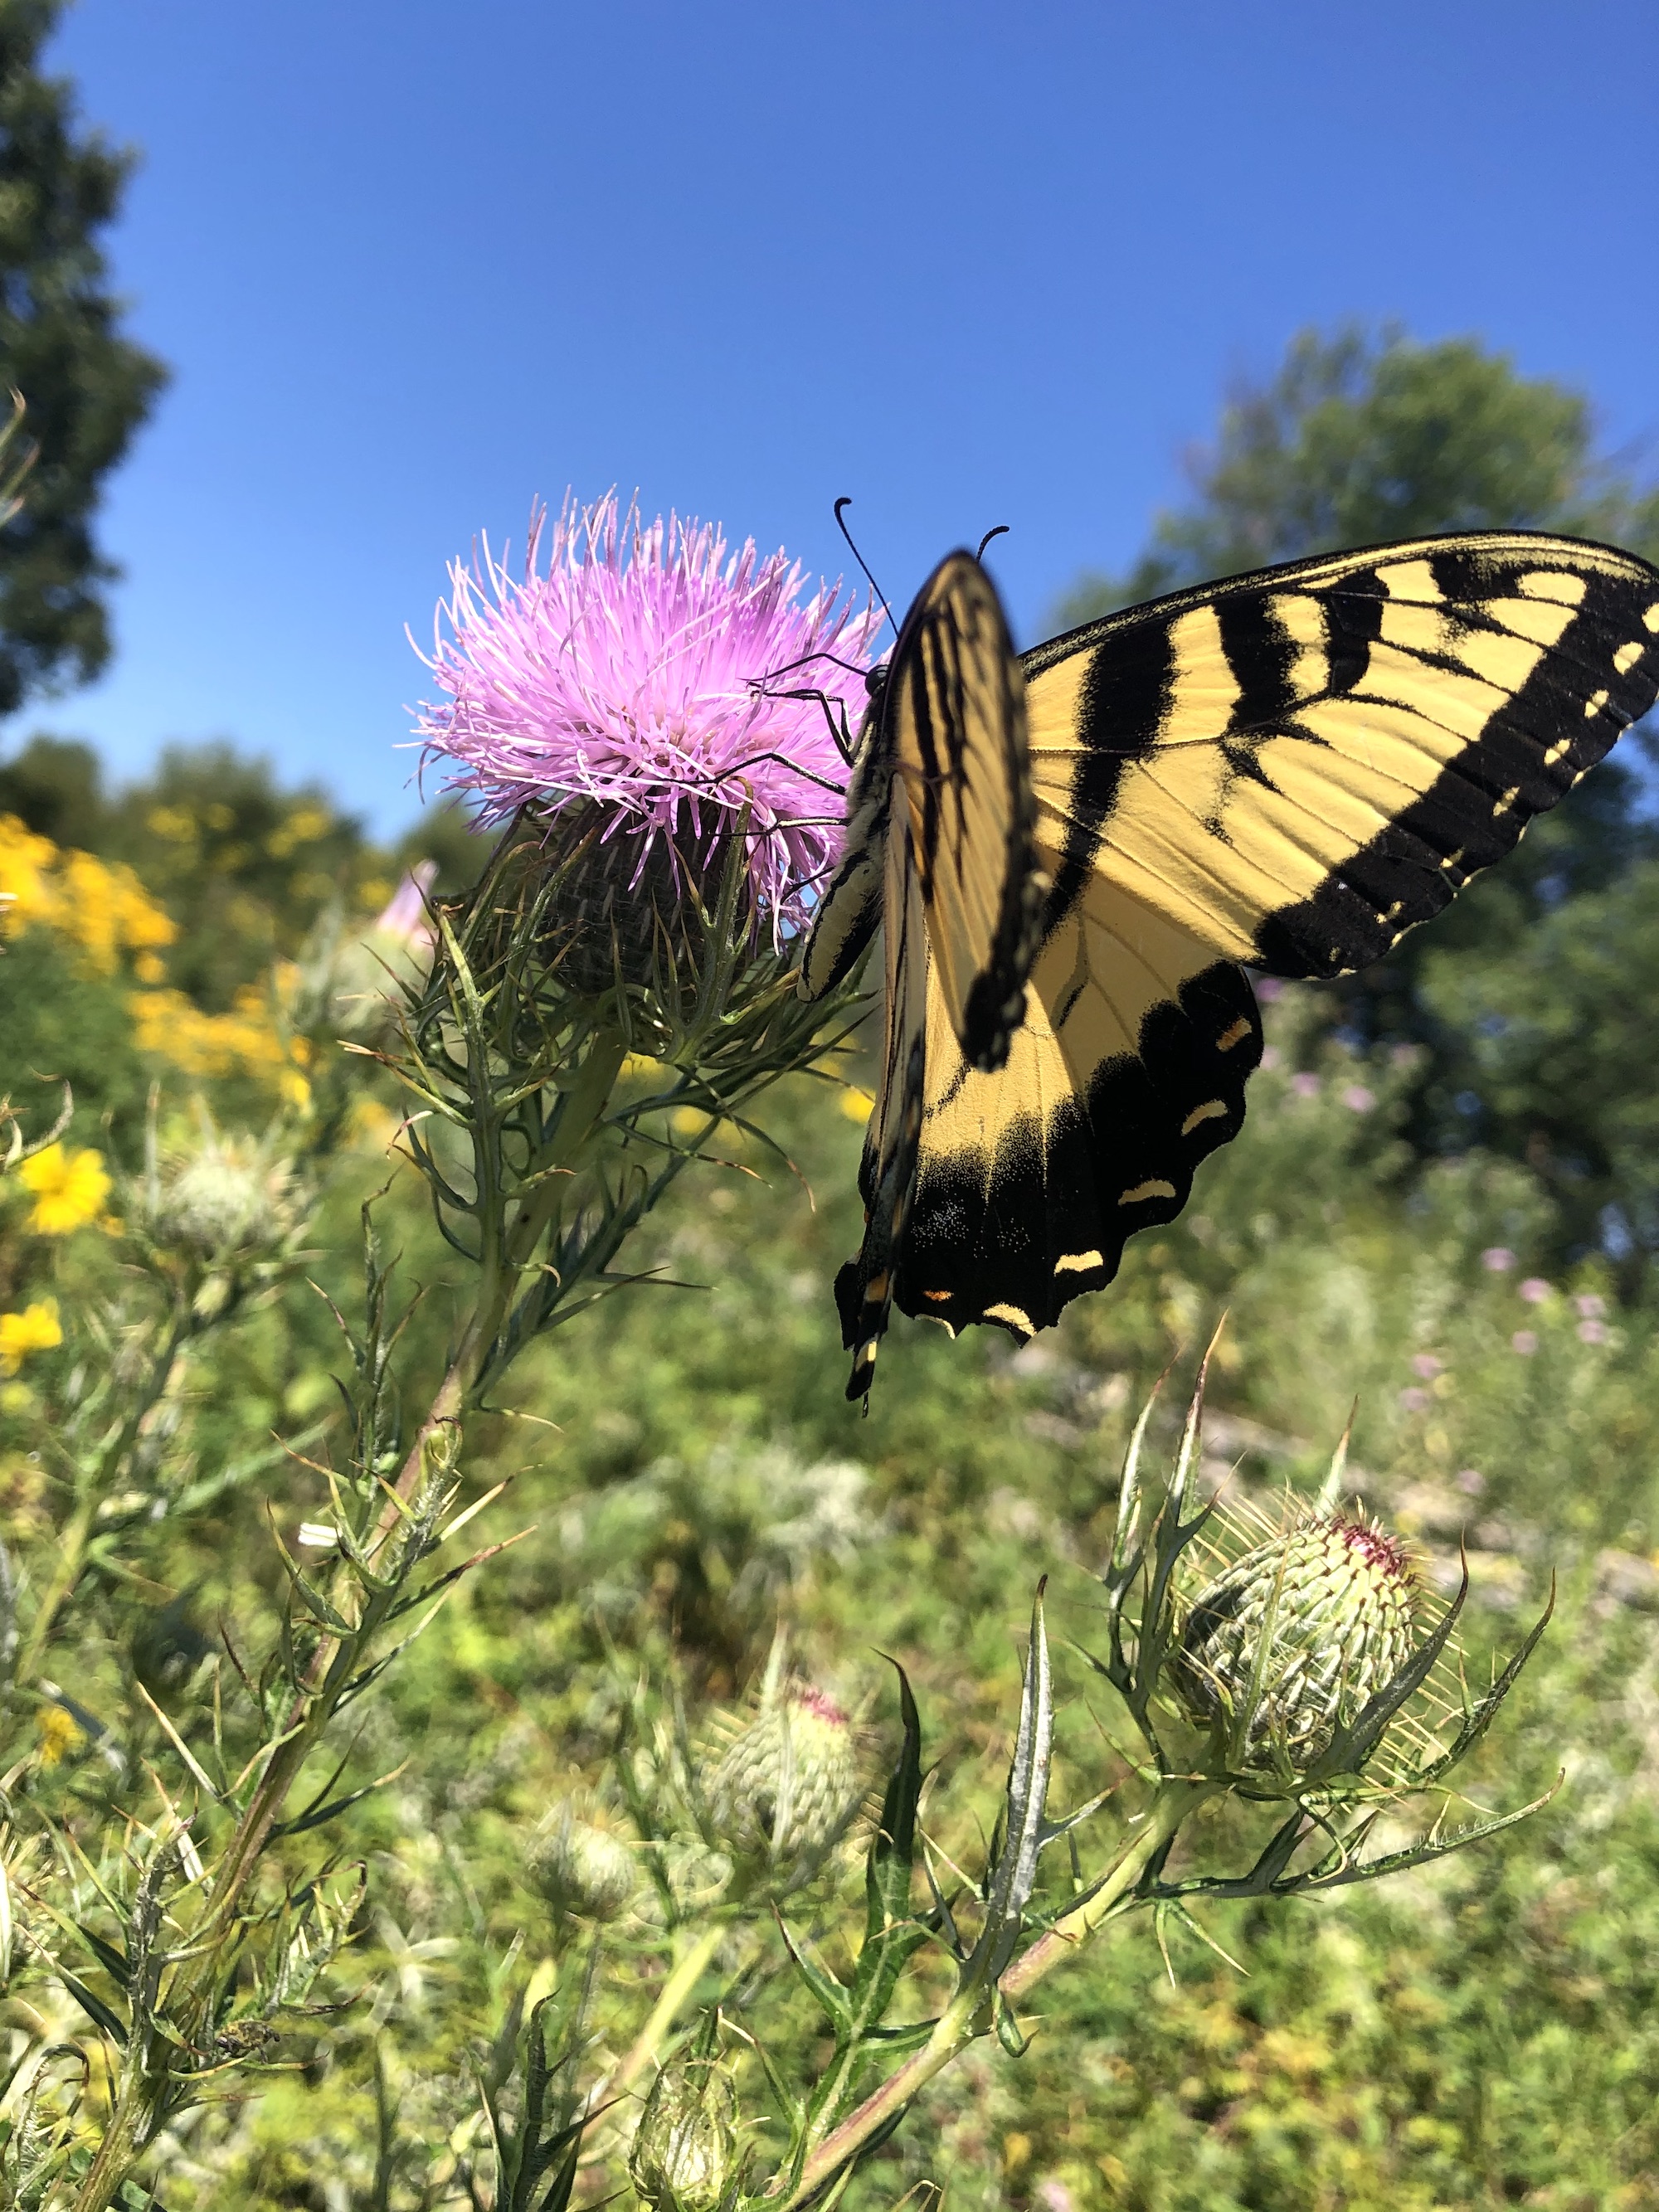 Eastern Swallowtail butterfly on Field Thistle near the Arboretum Visitor's Center in Madison, Wisconsin on August 16, 2020.